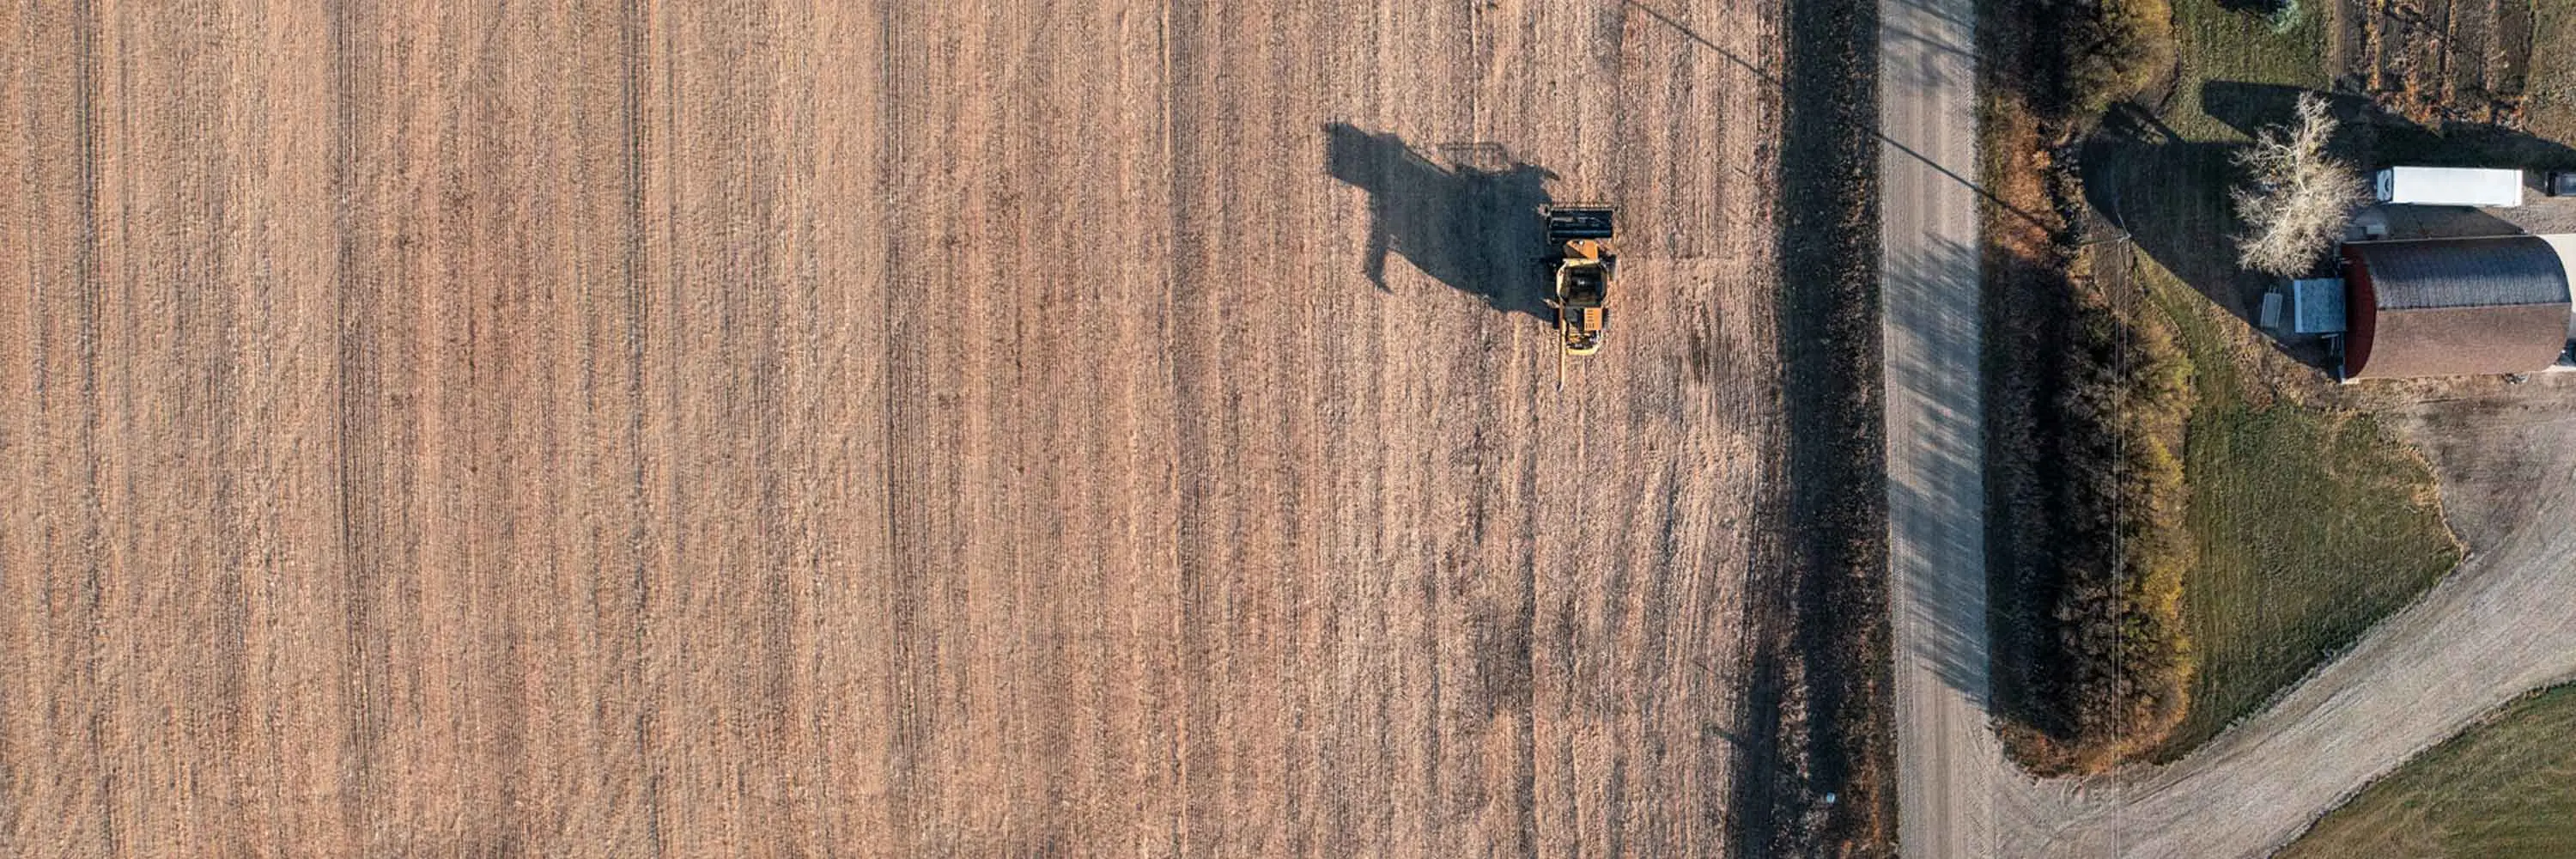 An aerial view of a tractor plowing a field.